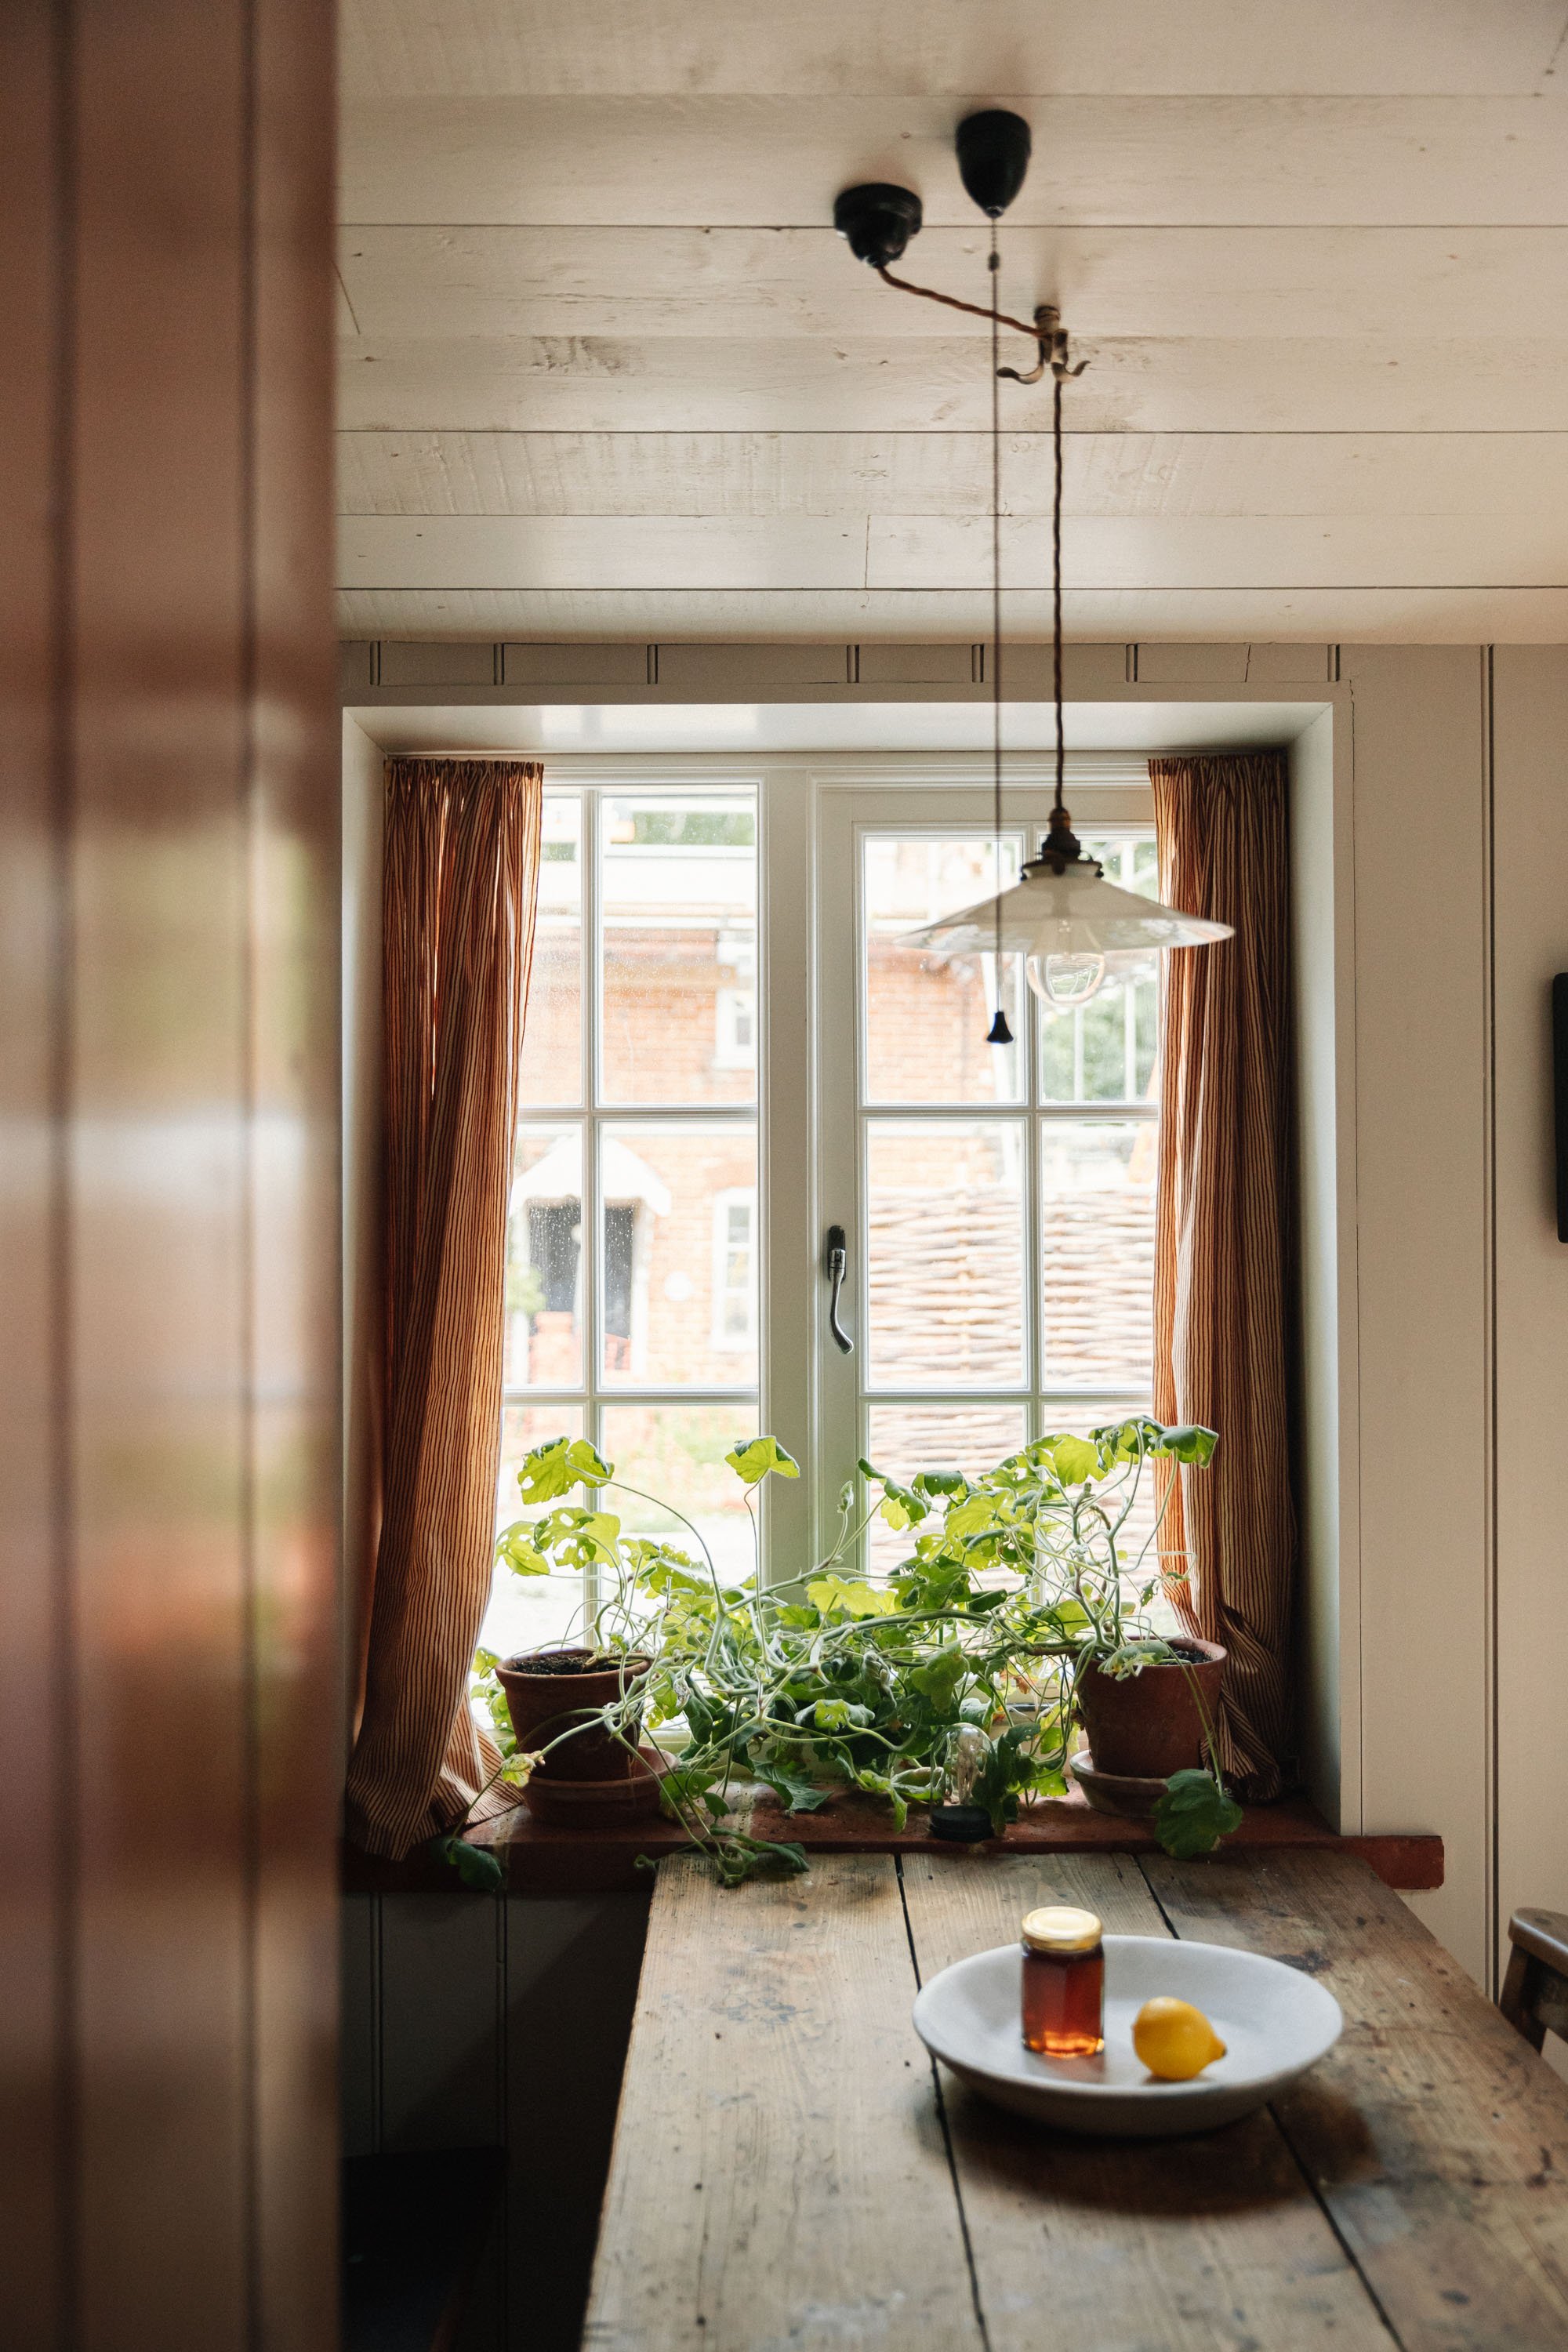 View of window with plants and wooden kitchen table